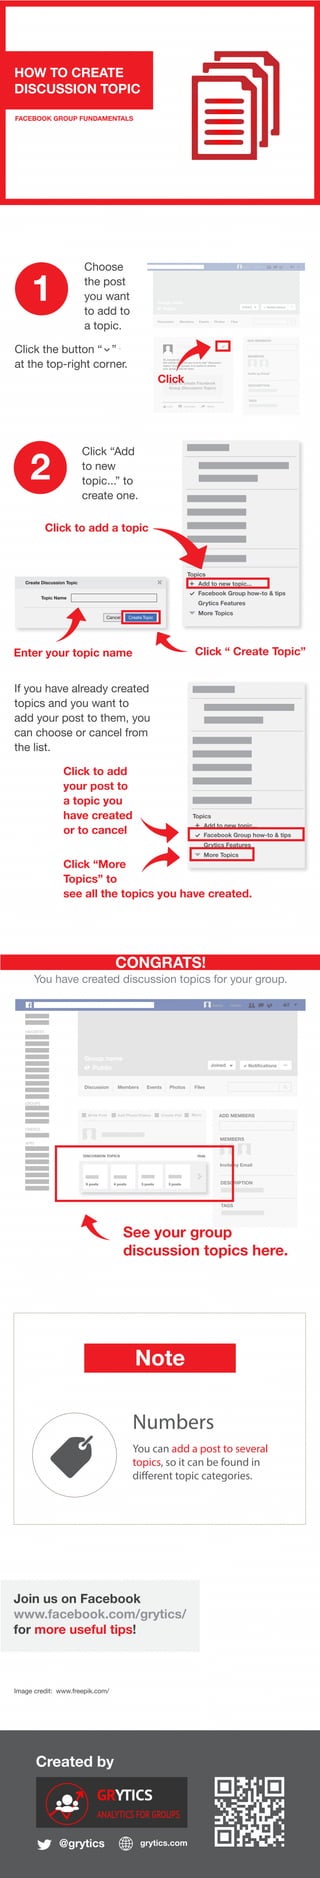 Created by
@grytics grytics.com
Hi, everybody,
this article will show you how to add “discussion
topics” to your groups. It is useful to archive
your group posts by topic.
Like Comment Share
How to create Facebook
Group Discussion Topics
+
Name Home
Group name
Public Joined Notifications ...
Discussion Members Events Photos Files
ADD MEMBERS
MEMBERS
Invite by Email
DESCRIPTION
TAGS
Join us on Facebook
www.facebook.com/grytics/
for more useful tips!
HOW TO CREATE
DISCUSSION TOPIC
FACEBOOK GROUP FUNDAMENTALS
Click the button “ ”
at the top-right corner.
1
2
FAVORITES
GROUPS
FRIENDS
APPS
Name Home
Group name
Public Joined Notifications ...
Discussion Members Events Photos Files
Write Post Add Photo/Videso Create Poll More ADD MEMBERS
MEMBERS
Invite by Email
DESCRIPTION
TAGS
CONGRATS!
You have created discussion topics for your group.
See your group
discussion topics here.
Image credit: www.freepik.com/
Grou
Choose
the post
you want
to add to
a topic.
Click
Click “Add
to new
topic...” to
create one.
Note
Click to add a topic
Numbers
You can add a post to several
topics, so it can be found in
different topic categories.
Topics
Add to new topic...+
Grytics Features
Facebook Group how-to & tips
More Topics
Create Discussion Topic
Create TopicCancel
Topic Name
+
Enter your topic name Click “ Create Topic”
Topics
Add to new topic...+
Grytics Features
Facebook Group how-to & tips
More Topics
If you have already created
topics and you want to
add your post to them, you
can choose or cancel from
the list.
Click to add
your post to
a topic you
have created
or to cancel
Click “More
Topics” to
see all the topics you have created.
DISCUSSION TOPICS Hide
6 posts 4 posts 5 posts 3 posts
 